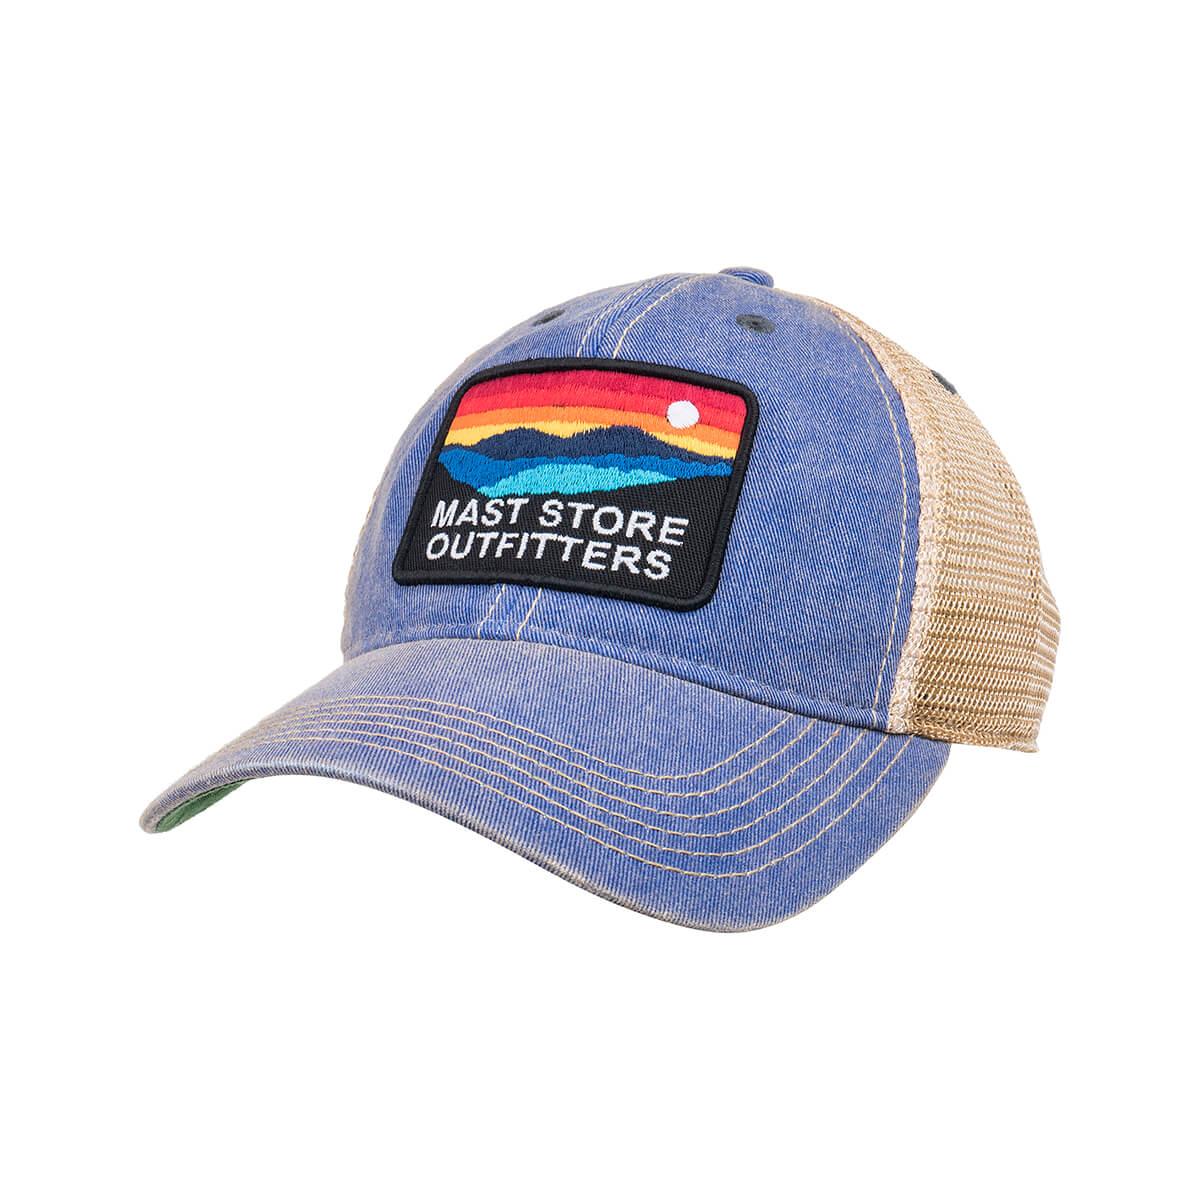  Kids ' Mast Store Outfitters Sunset Trucker Hat